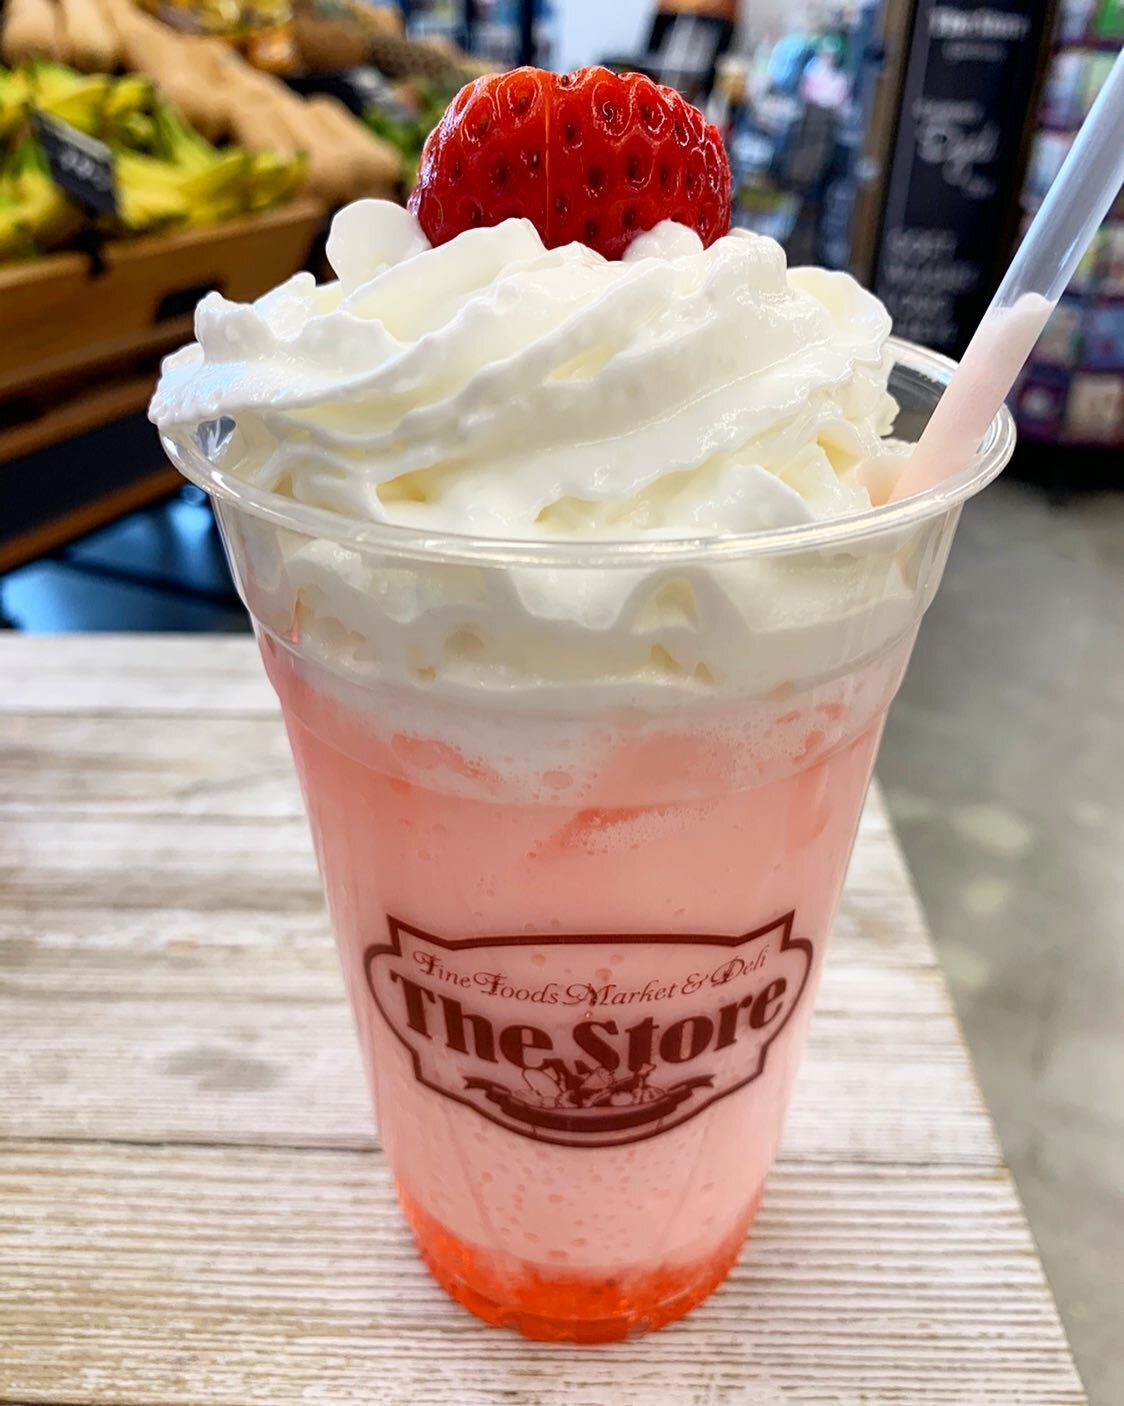 Strawberry Italian Soda 🇮🇹
_
Happy Thirsty Thursday! 
_
Today&rsquo;s thirst quenching drink is the flavorful Strawberry Italian Soda. 🍓
_
Ingredients:
_
1/2 cup pool of Club Soda
_
3 TBSP of Torani Syrup 
_
Cup of ice
_
1-2 TBSP Half and Half 
_
